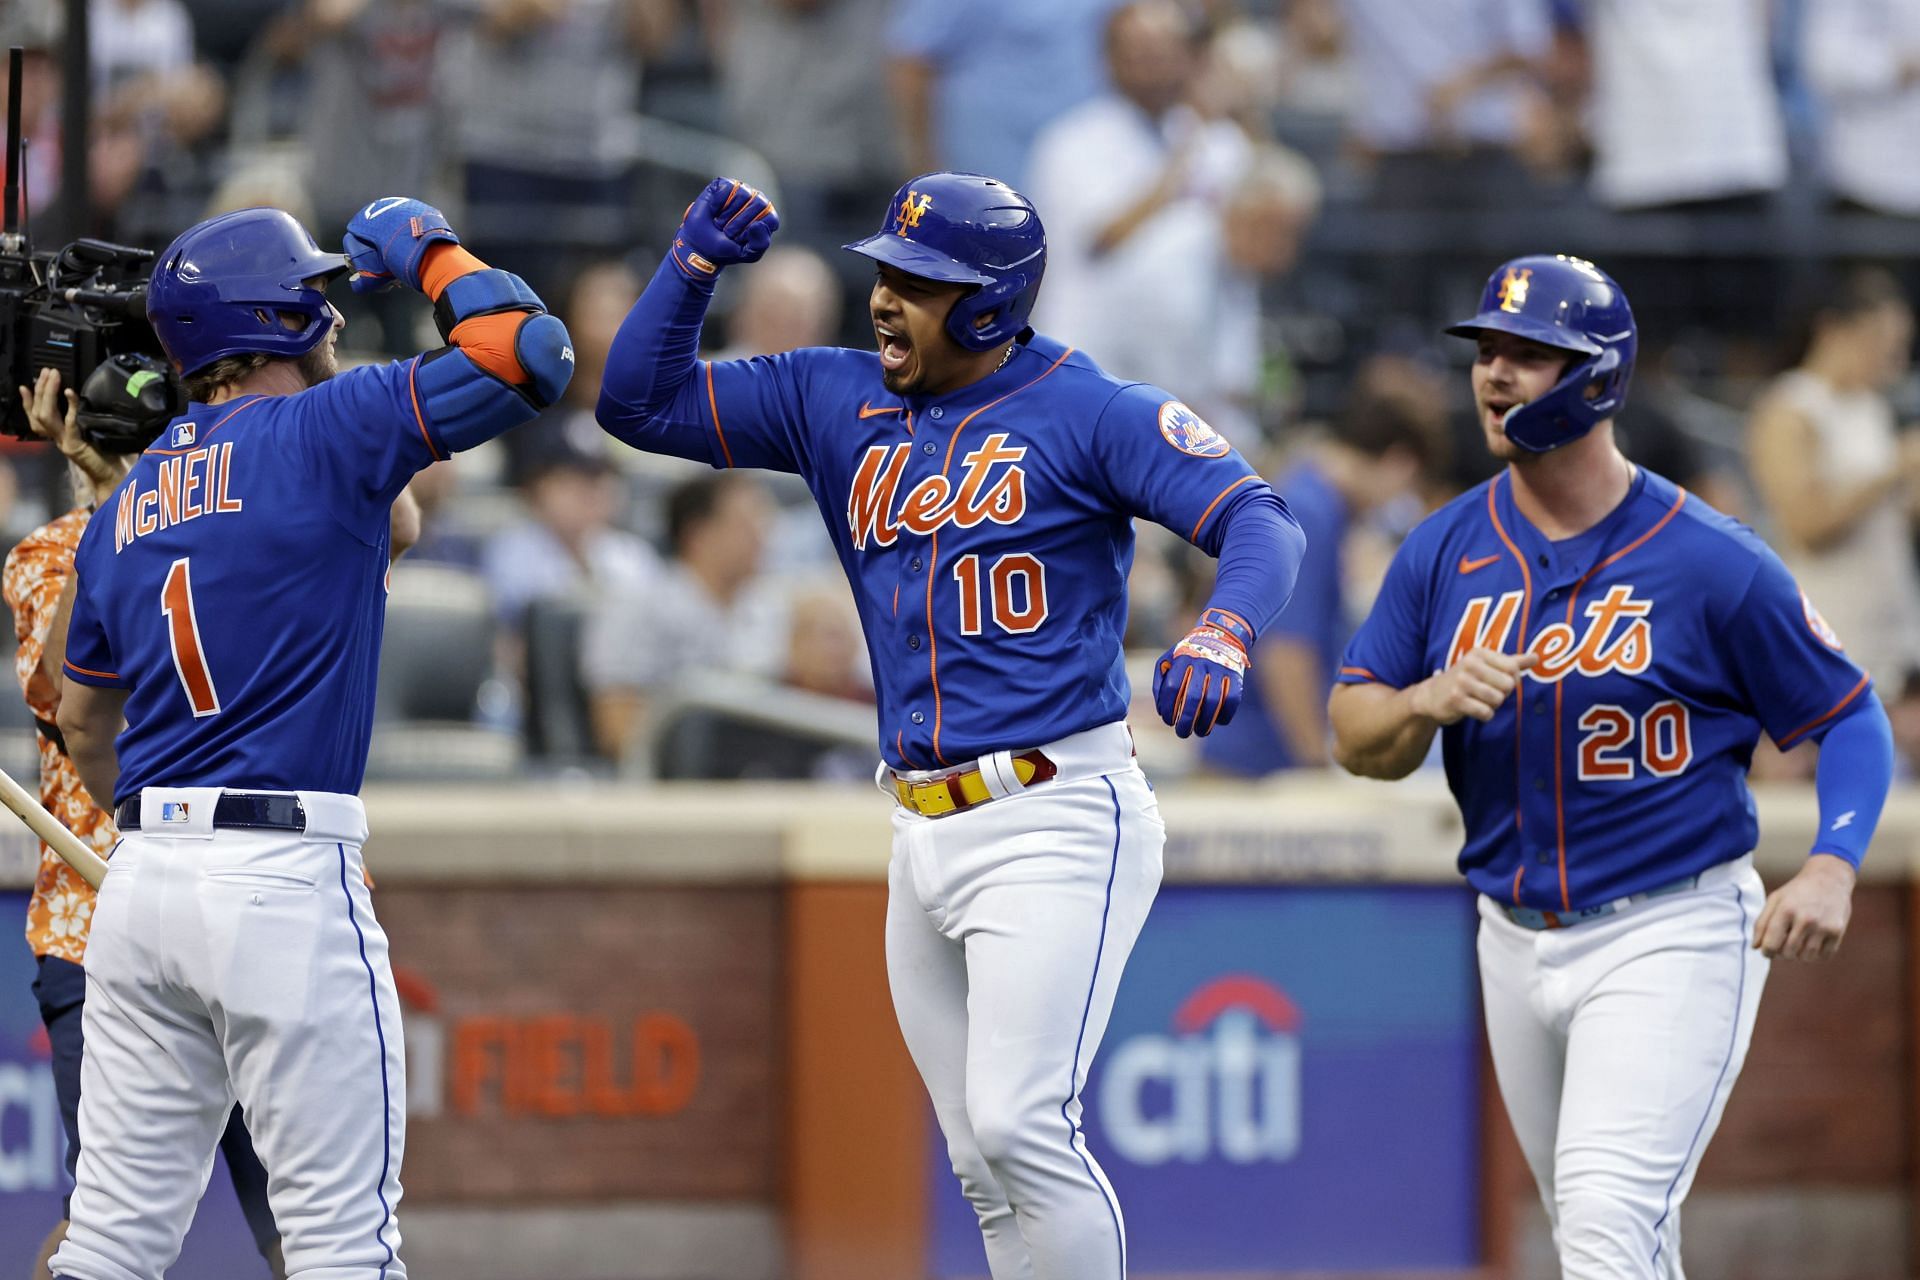 Mets players celebrate during a New York Yankees v New York Mets game.